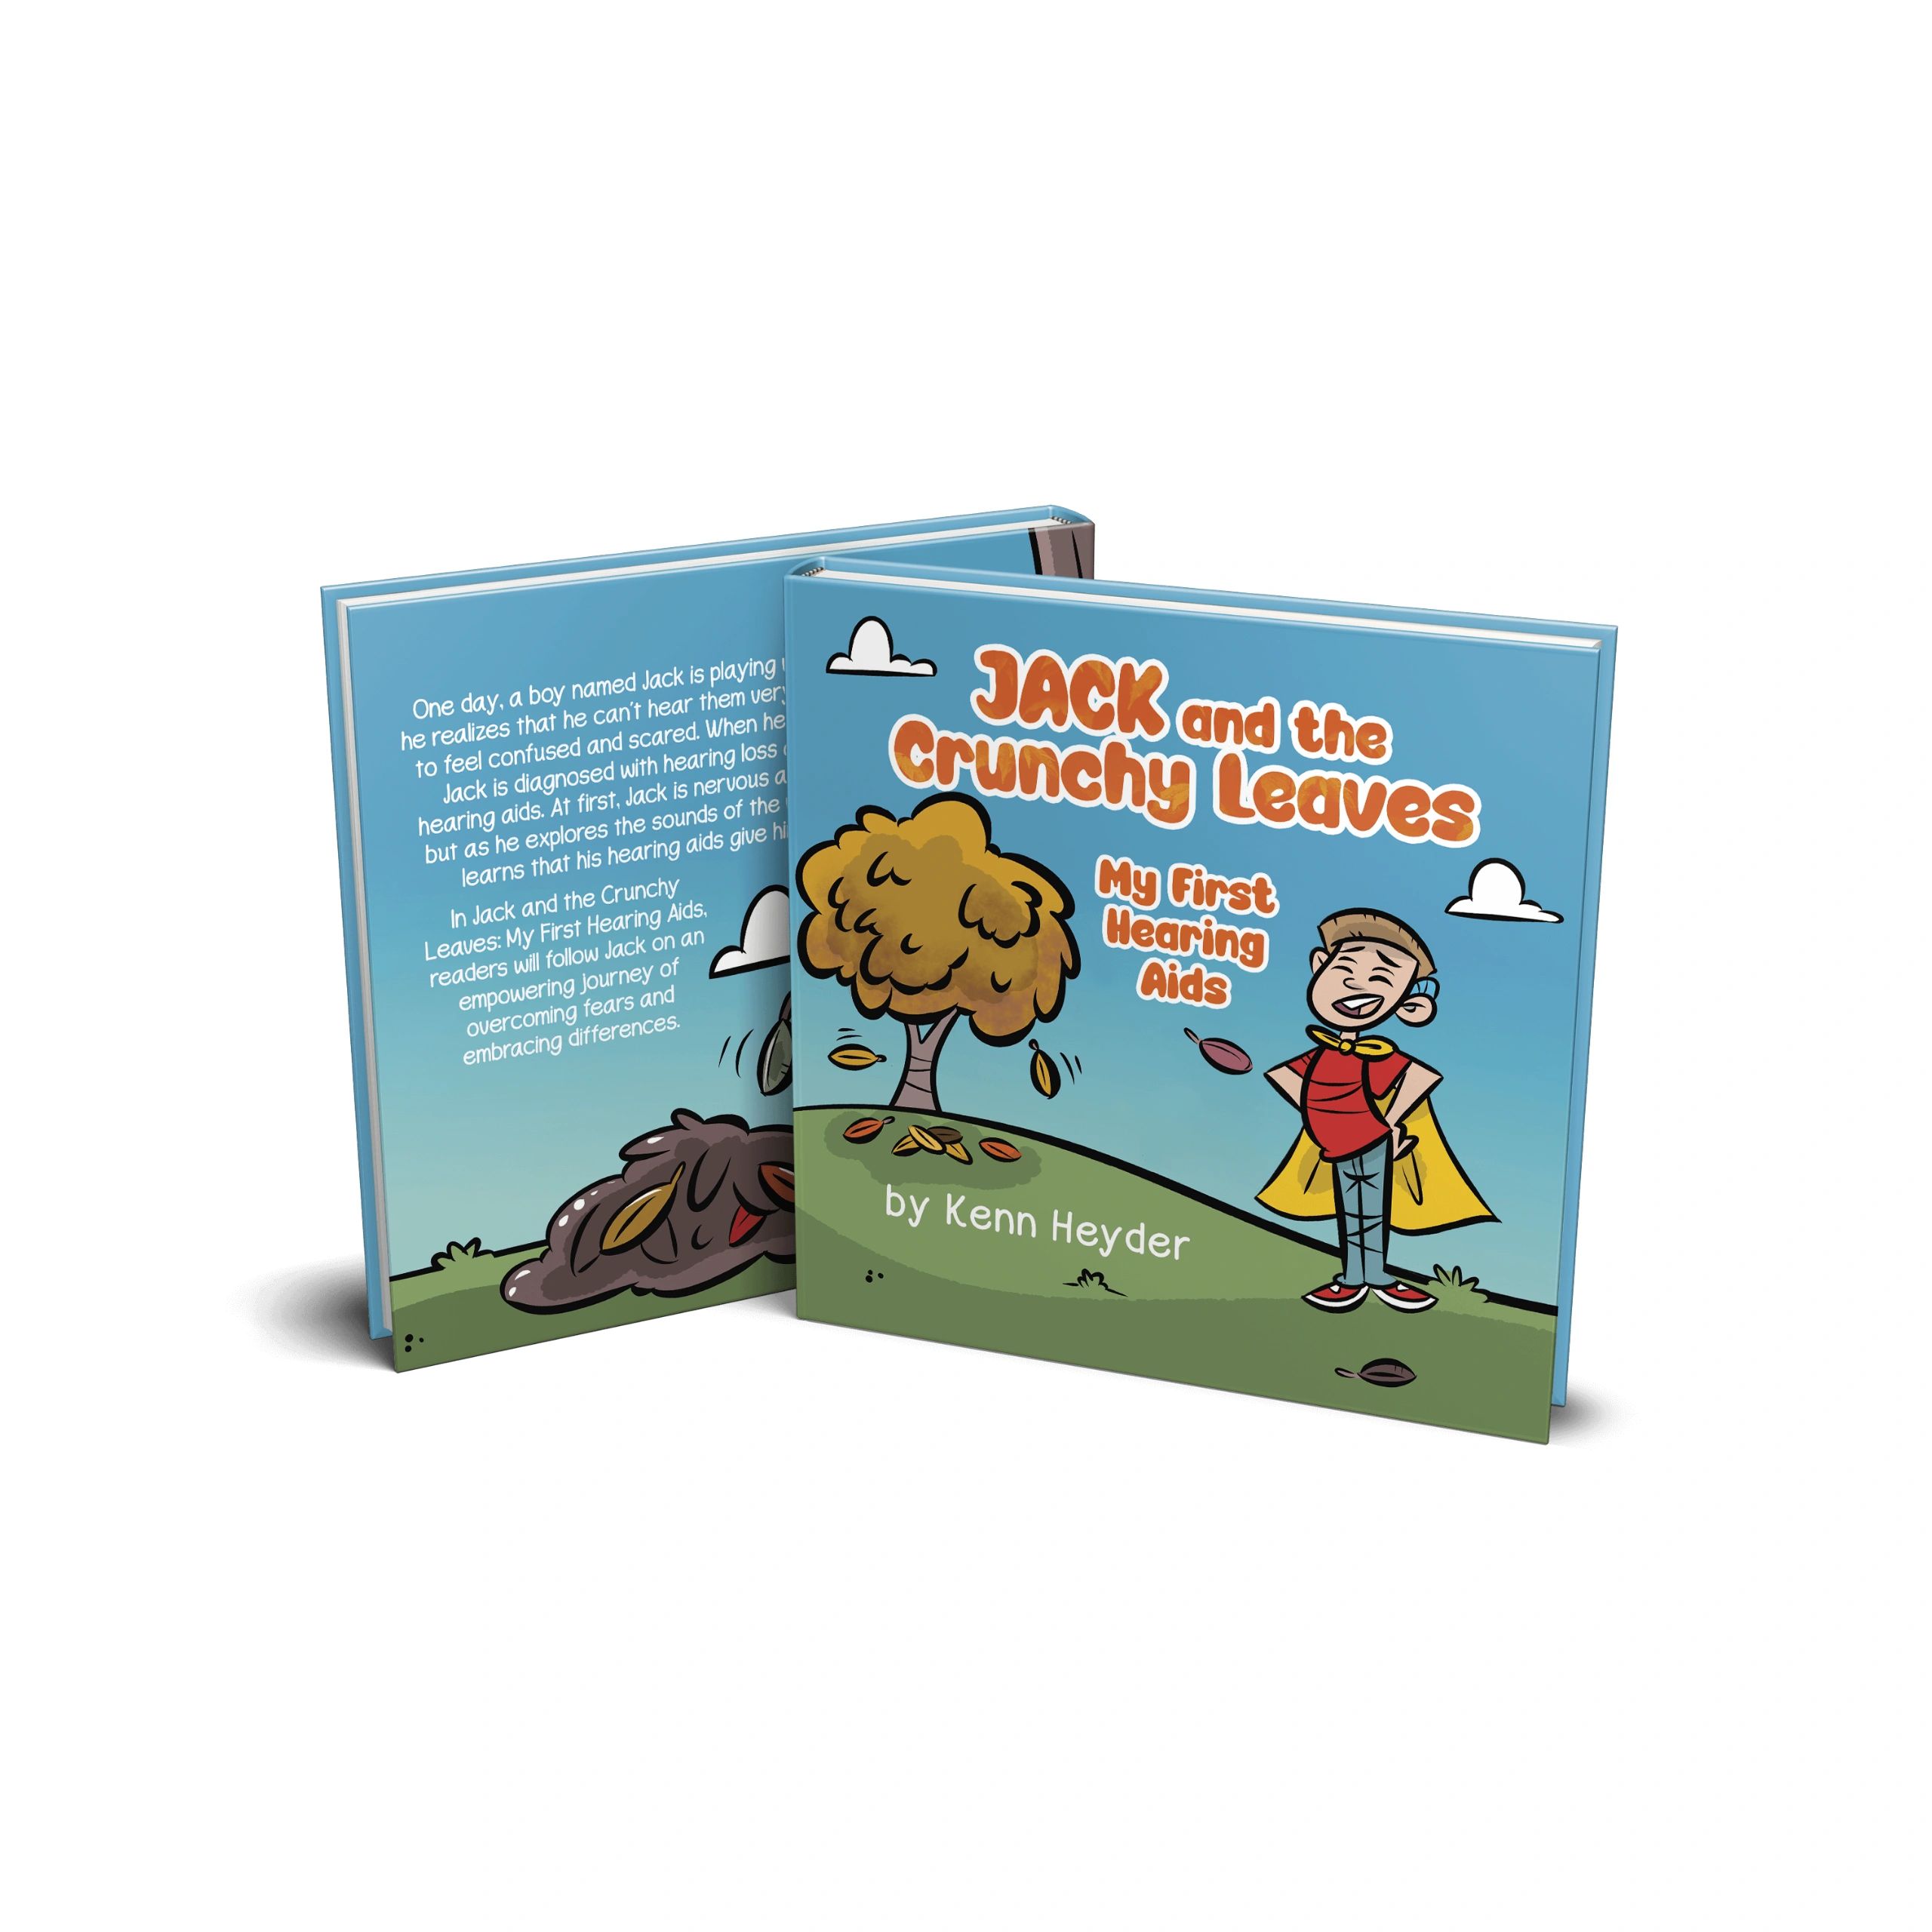 Book Cover of Jack and the Crunchy Leaves: My First Hearing Aids. Click to Purchase.